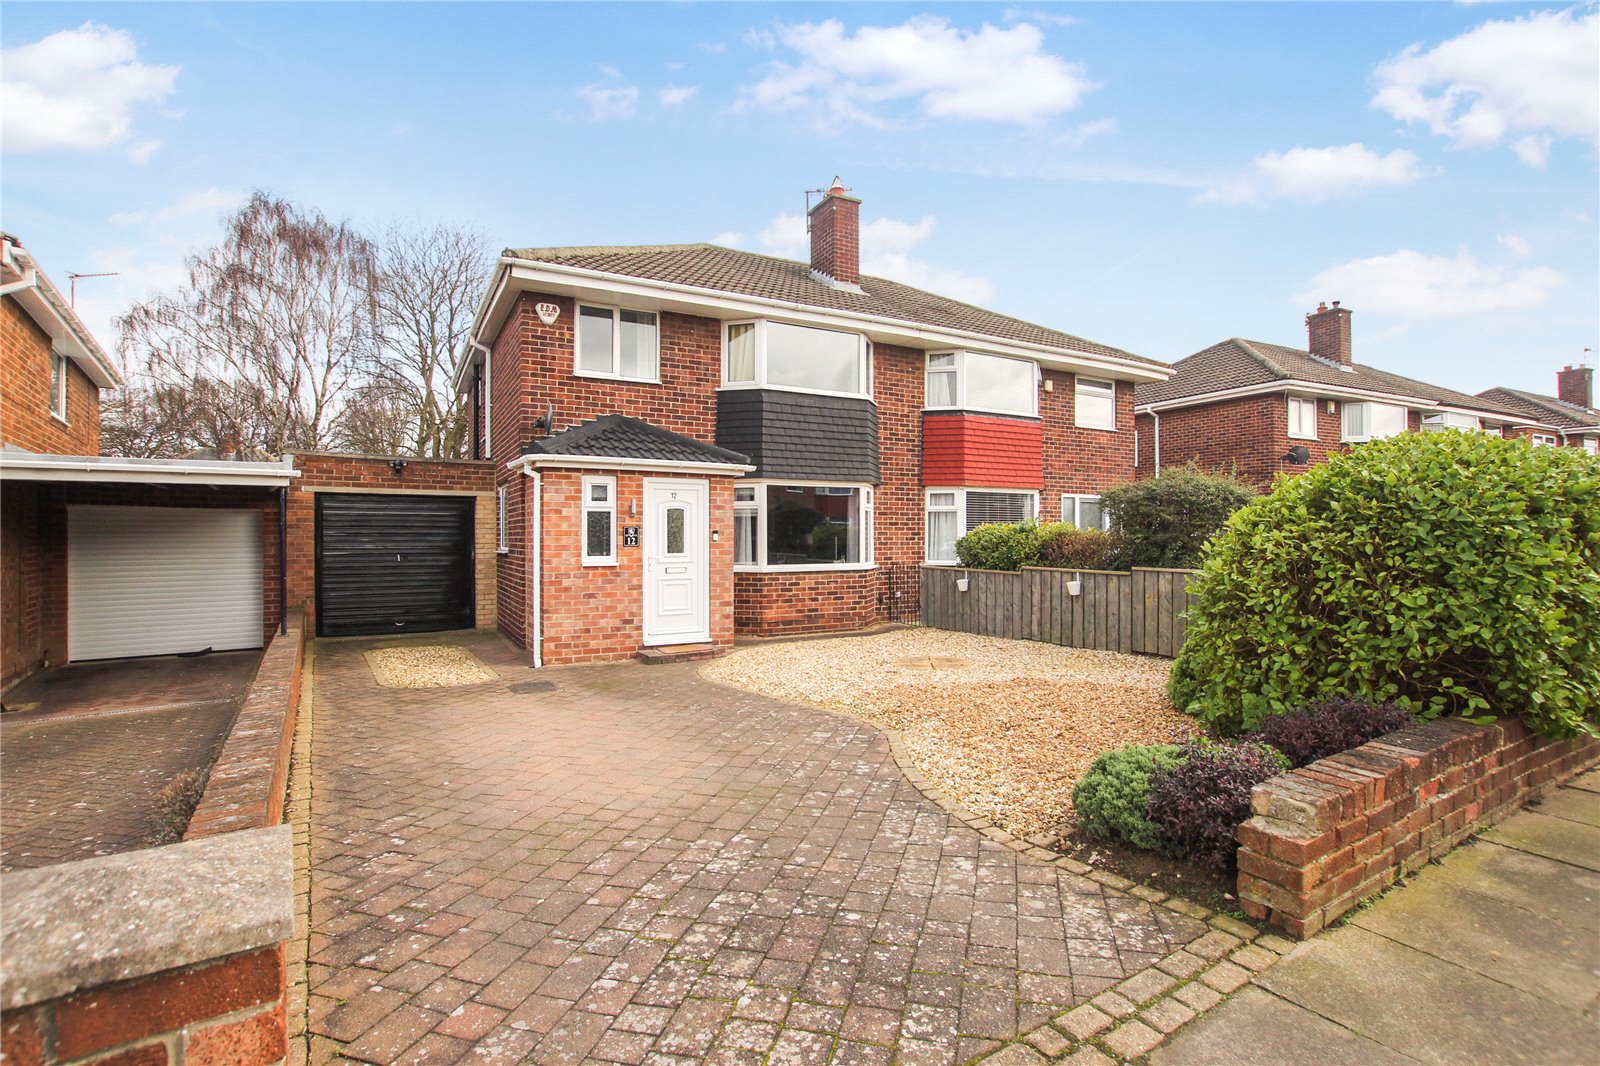 3 bed house for sale in Staindrop Drive, Acklam  - Property Image 1